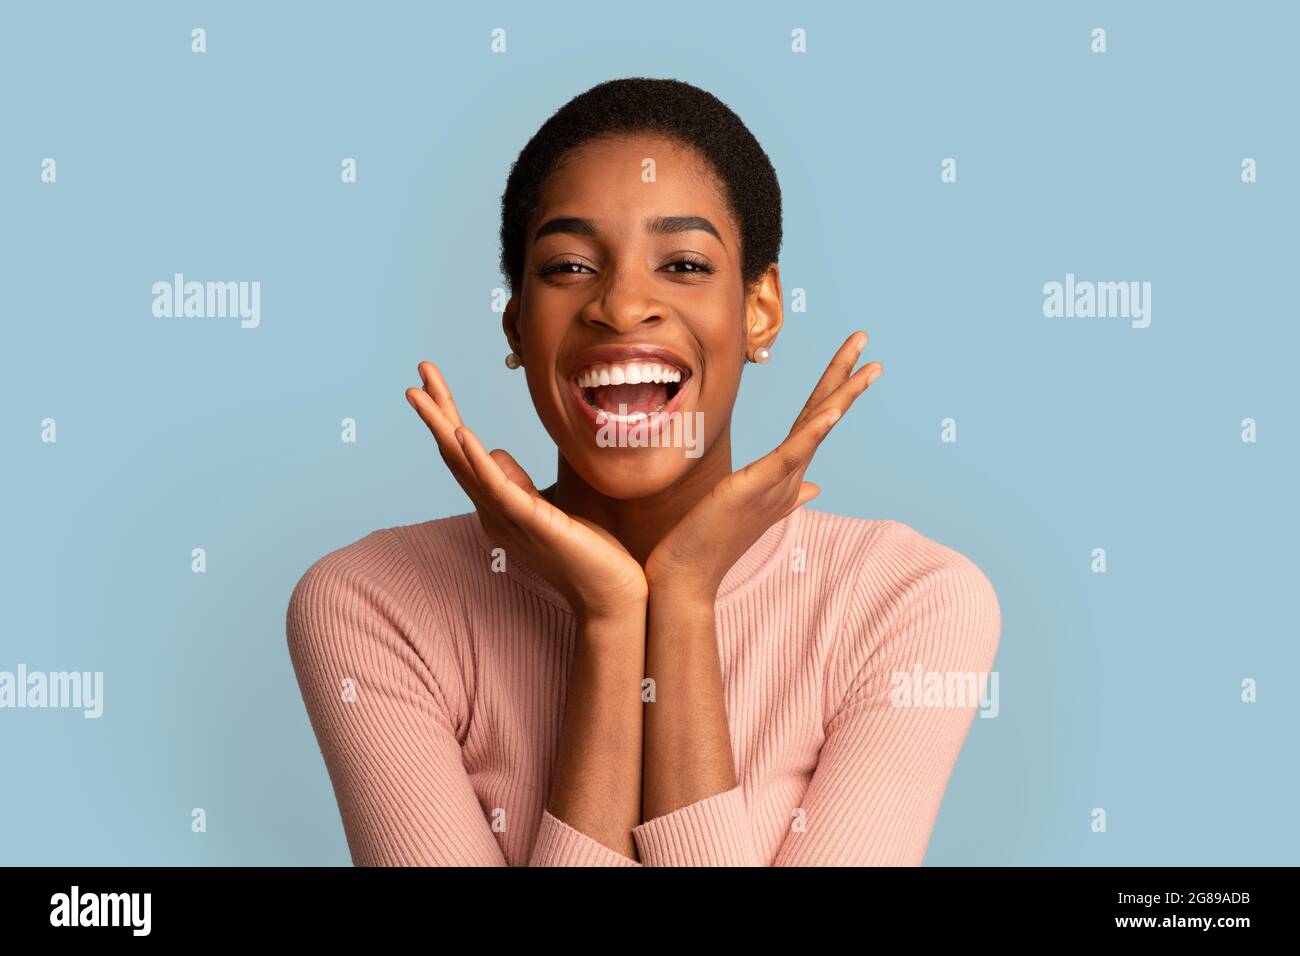 Happy Excitement. Joyful African Woman With Hands Near Face Laughing At Camera Stock Photo